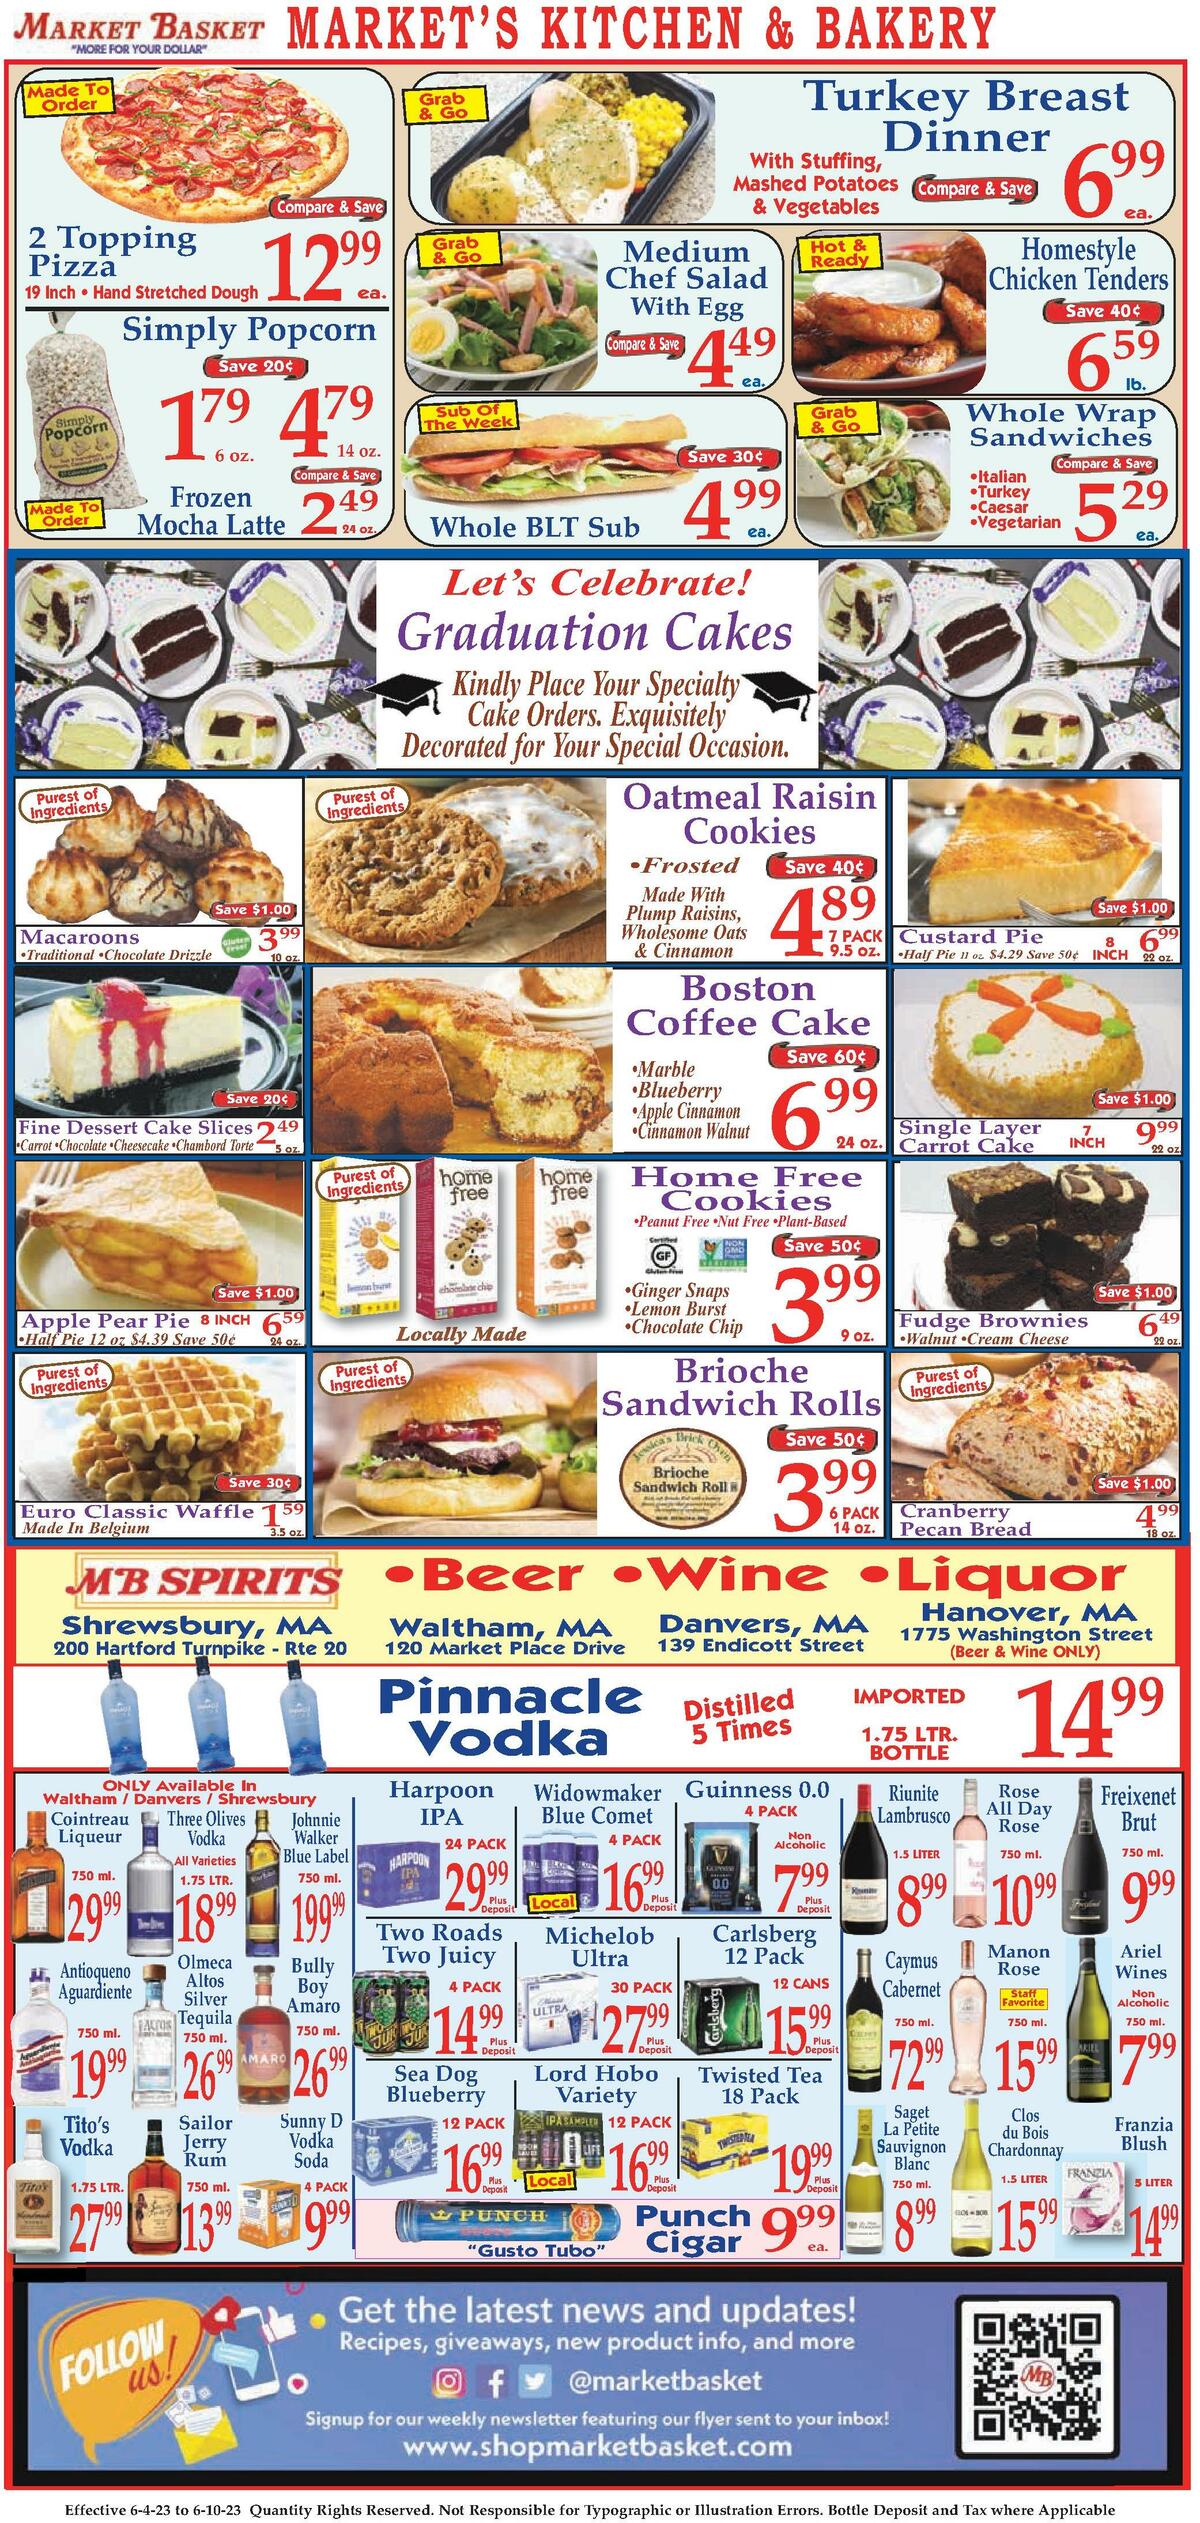 Market Basket Weekly Ad from June 4